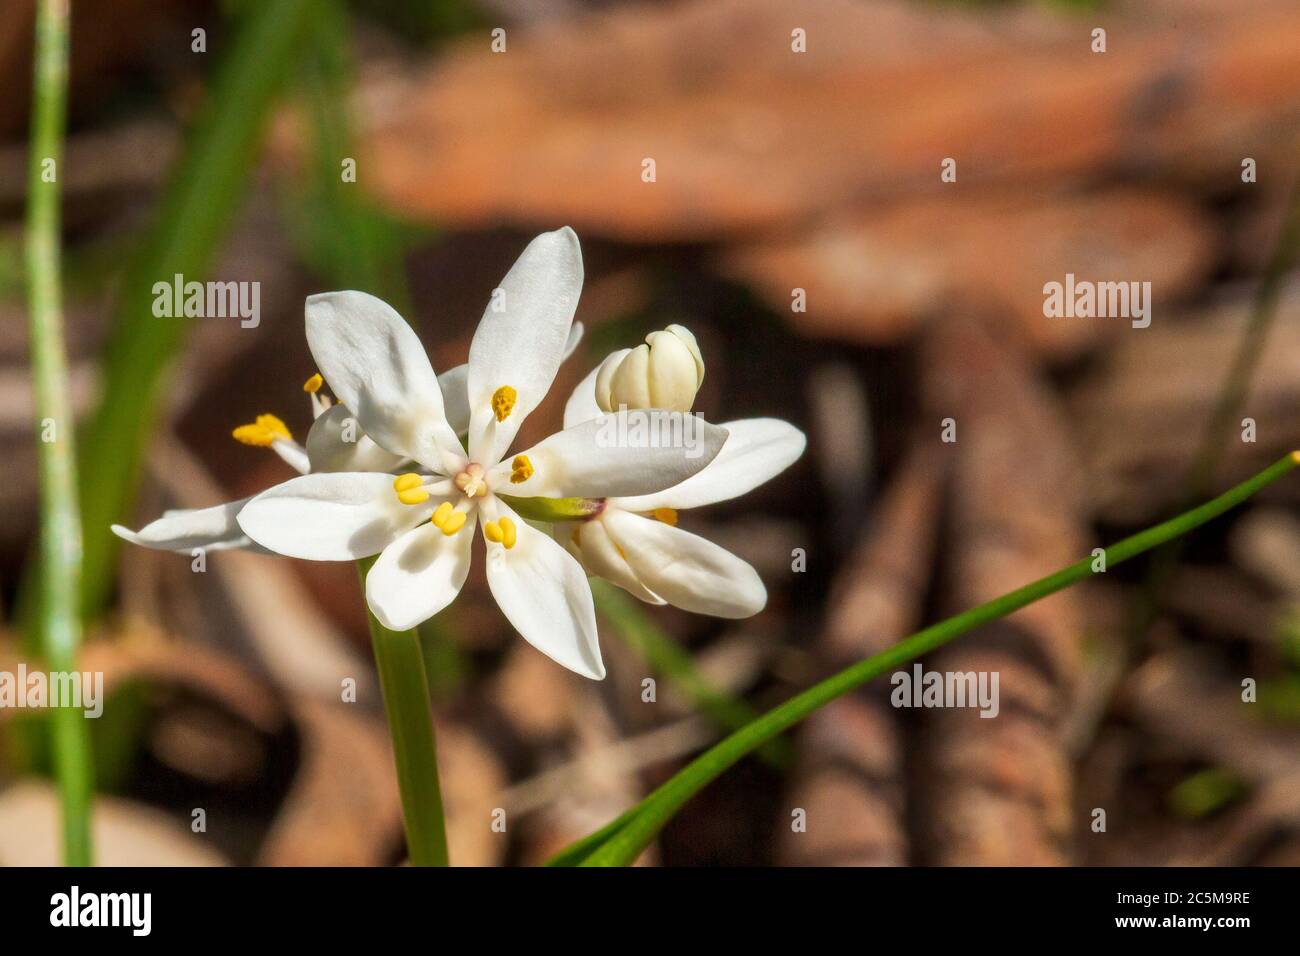 The flower of the Australian native plant known as the Common Early Nancy (Wurmbea dioica) Stock Photo